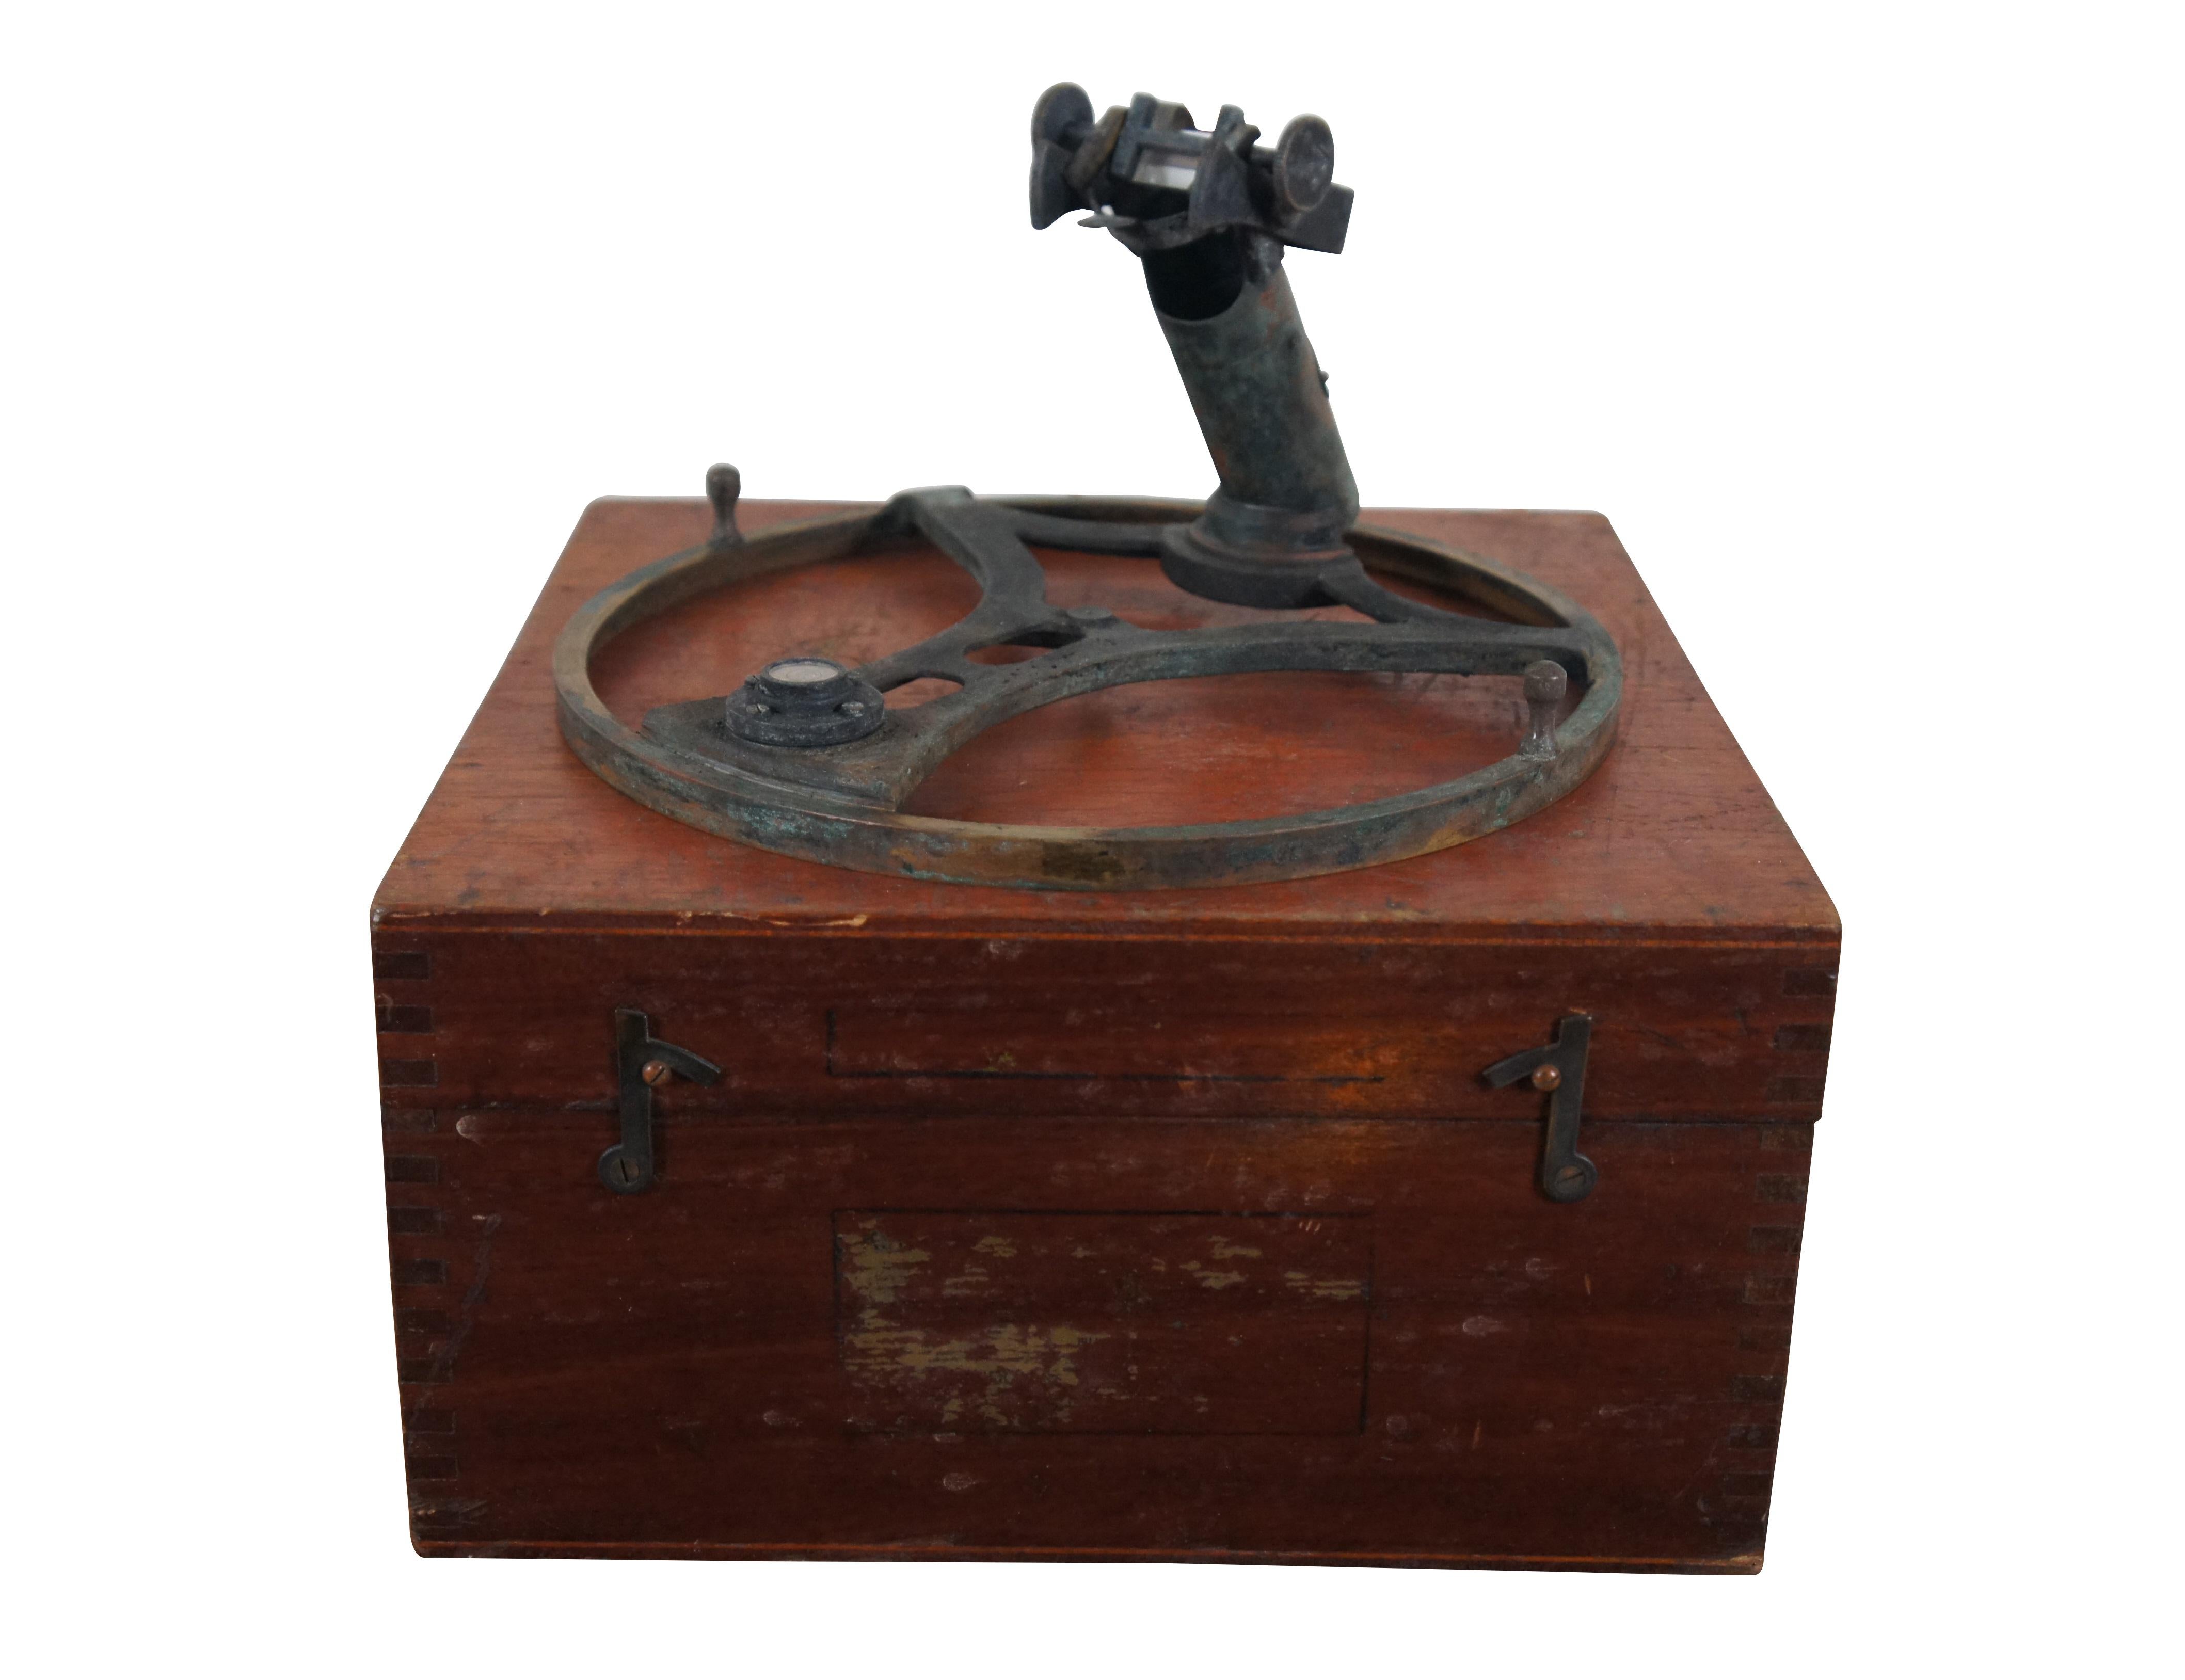 Lord Kelvin's Azimuth Mirror and dovetailed wooden storage carrying case. Made by Kelvin, Bottomly & Baird Ltd for Marine Instruments Ltd. Circa 1910-30s.  Made in Great Britain.

An azimuth circle is a navigation instrument in the form of a brass